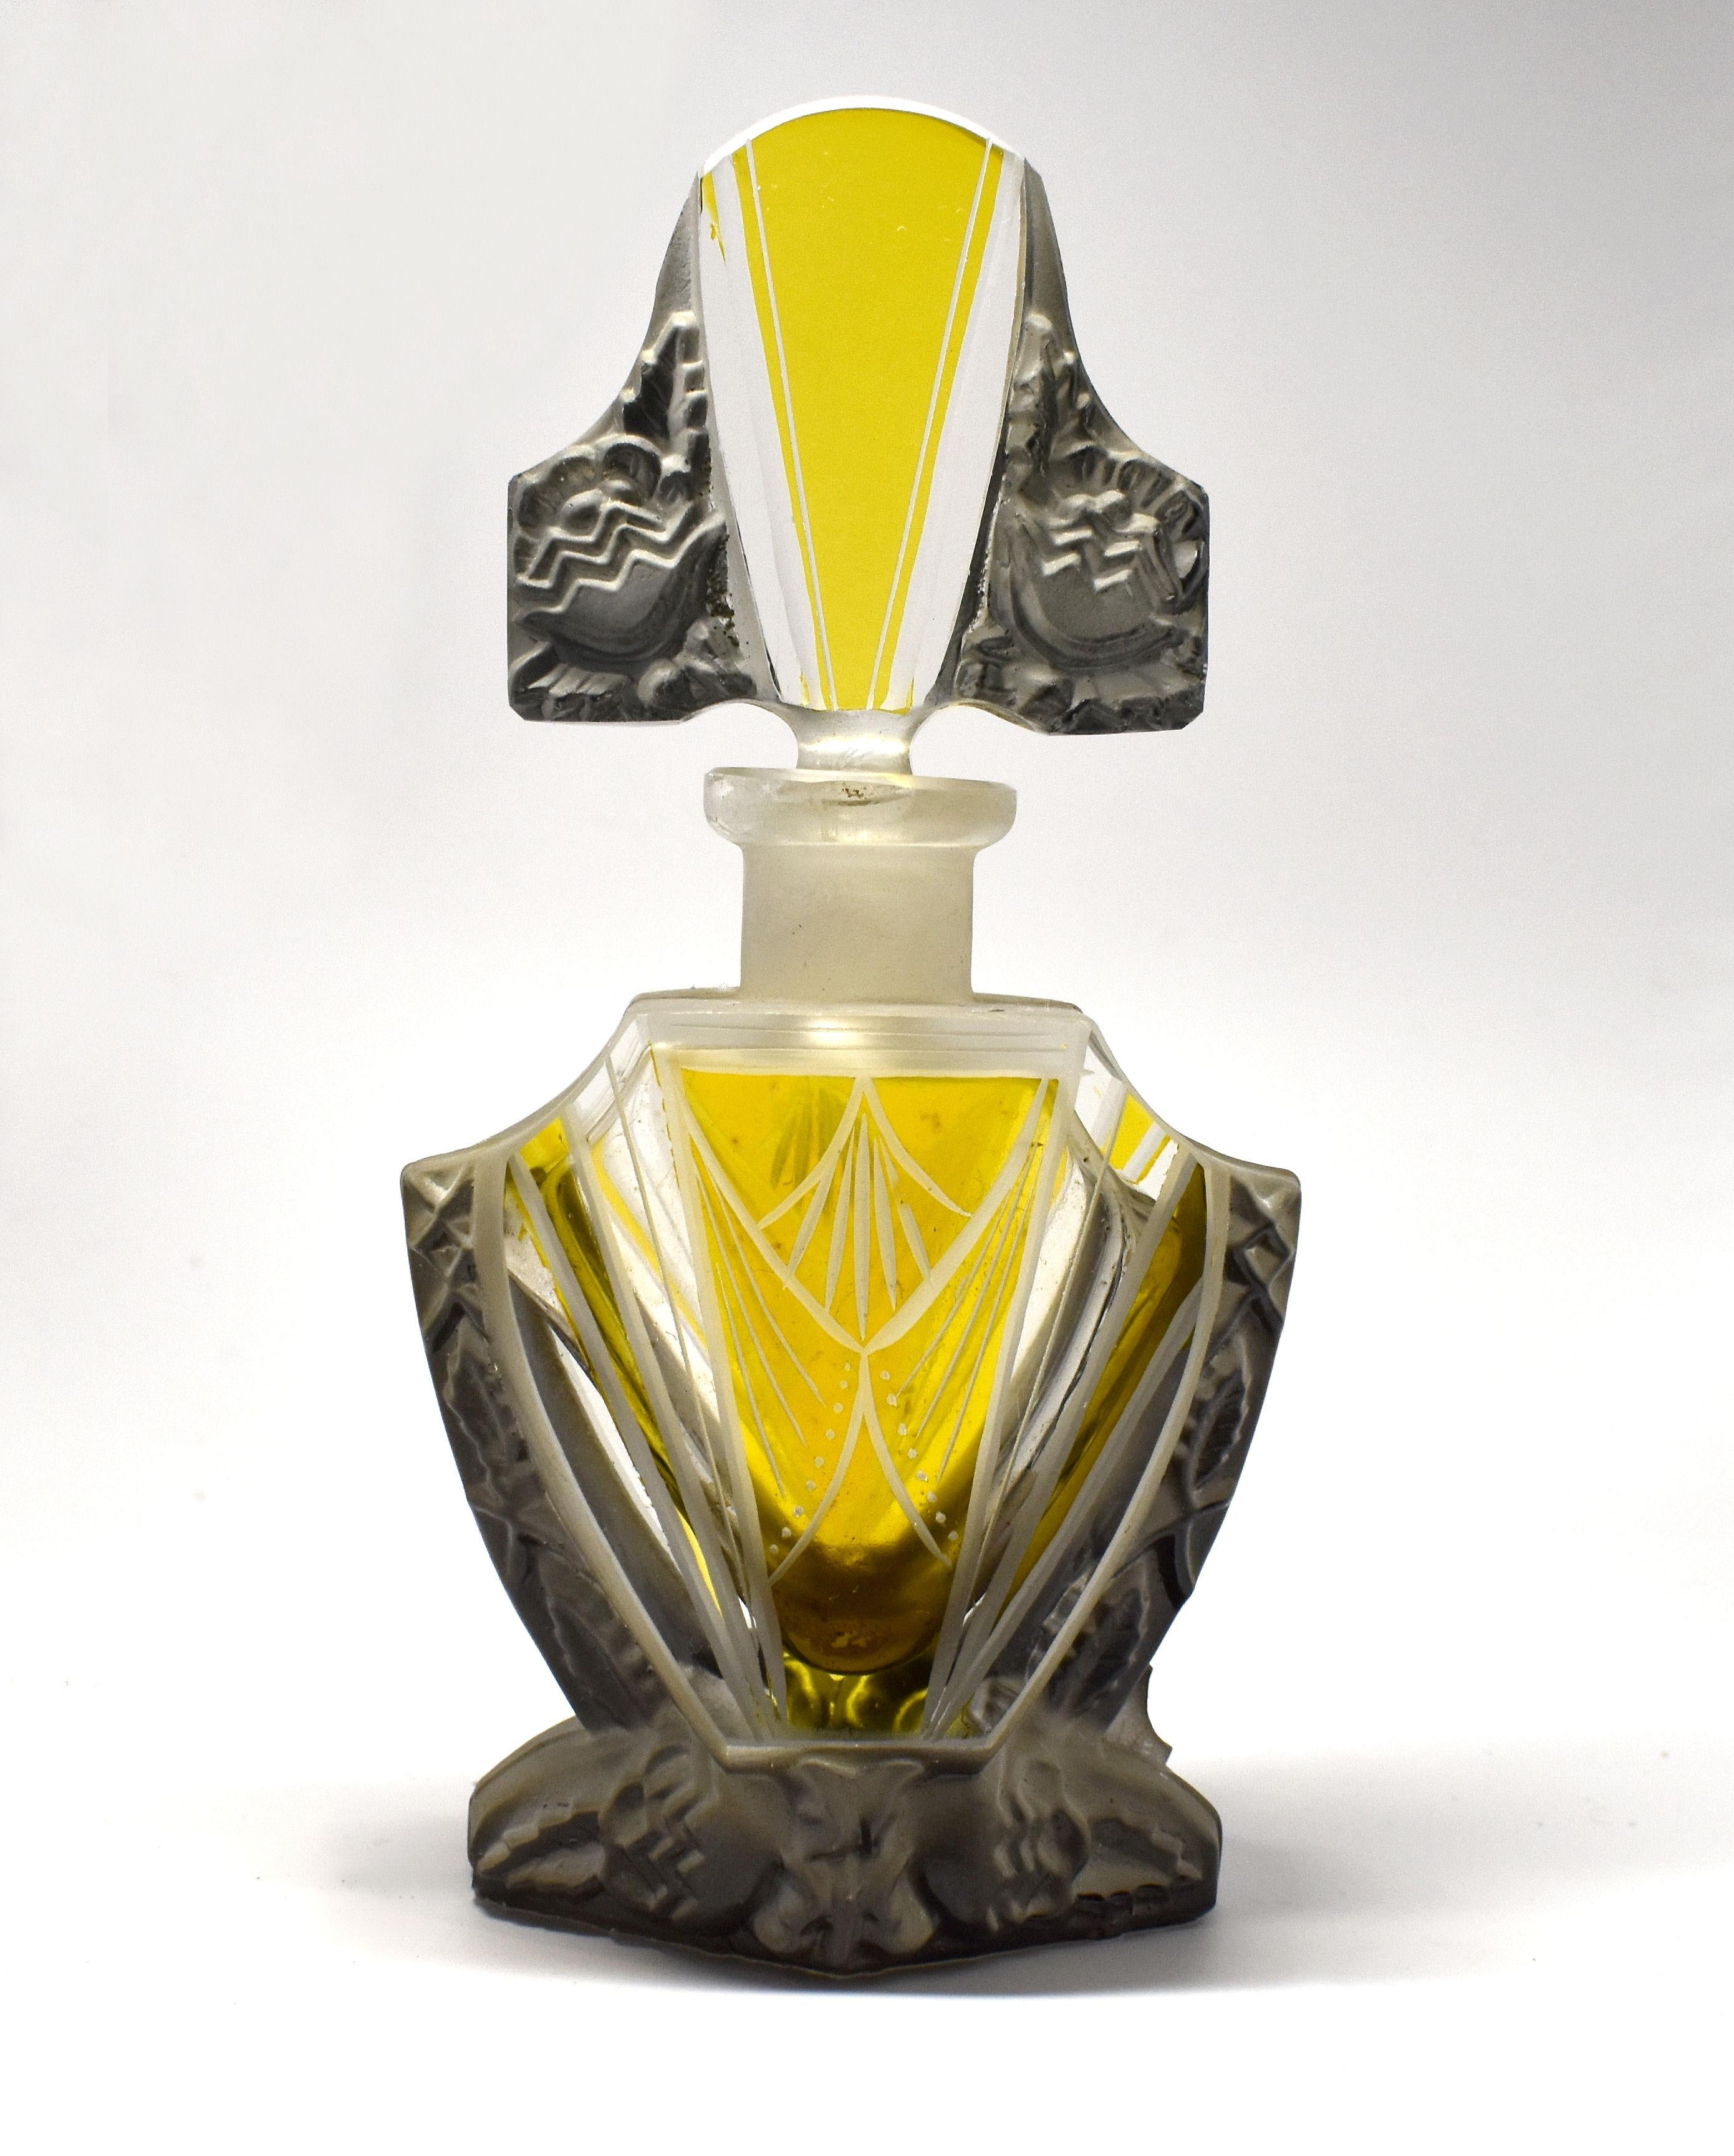 For your consideration is this fabulous Art Deco perfume bottle, intricately detailed facet-cut glass with acid mat relief panels in a clear glass, manufactured by Curt Schlevogt, who established his own glass company in 1928 and later became -